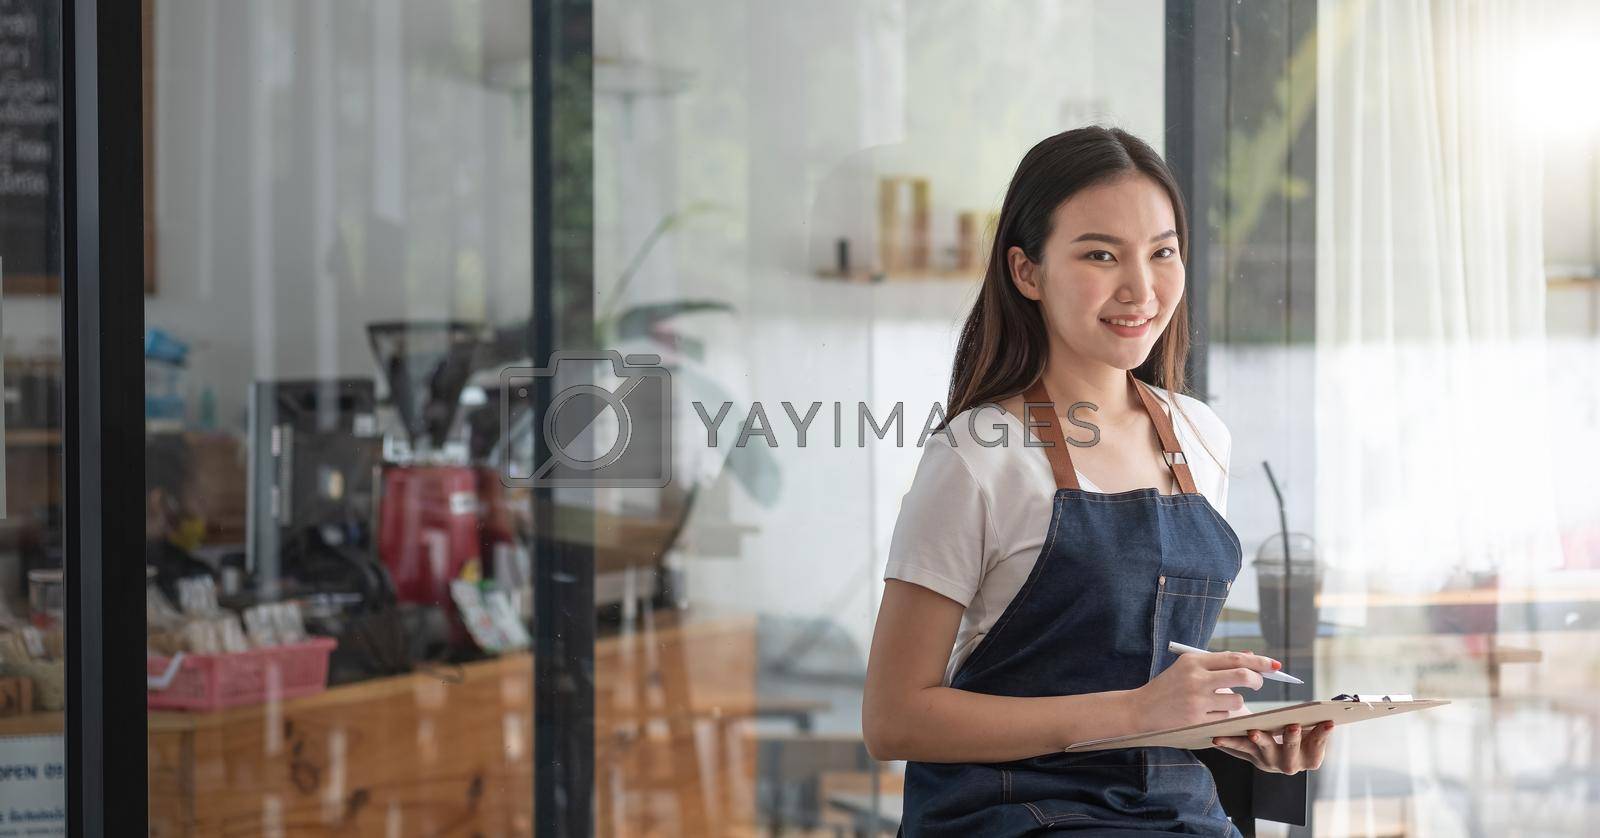 Royalty free image of Cheerful smiling young Asian woman entrepreneur at coffee shop counter with order list by nateemee